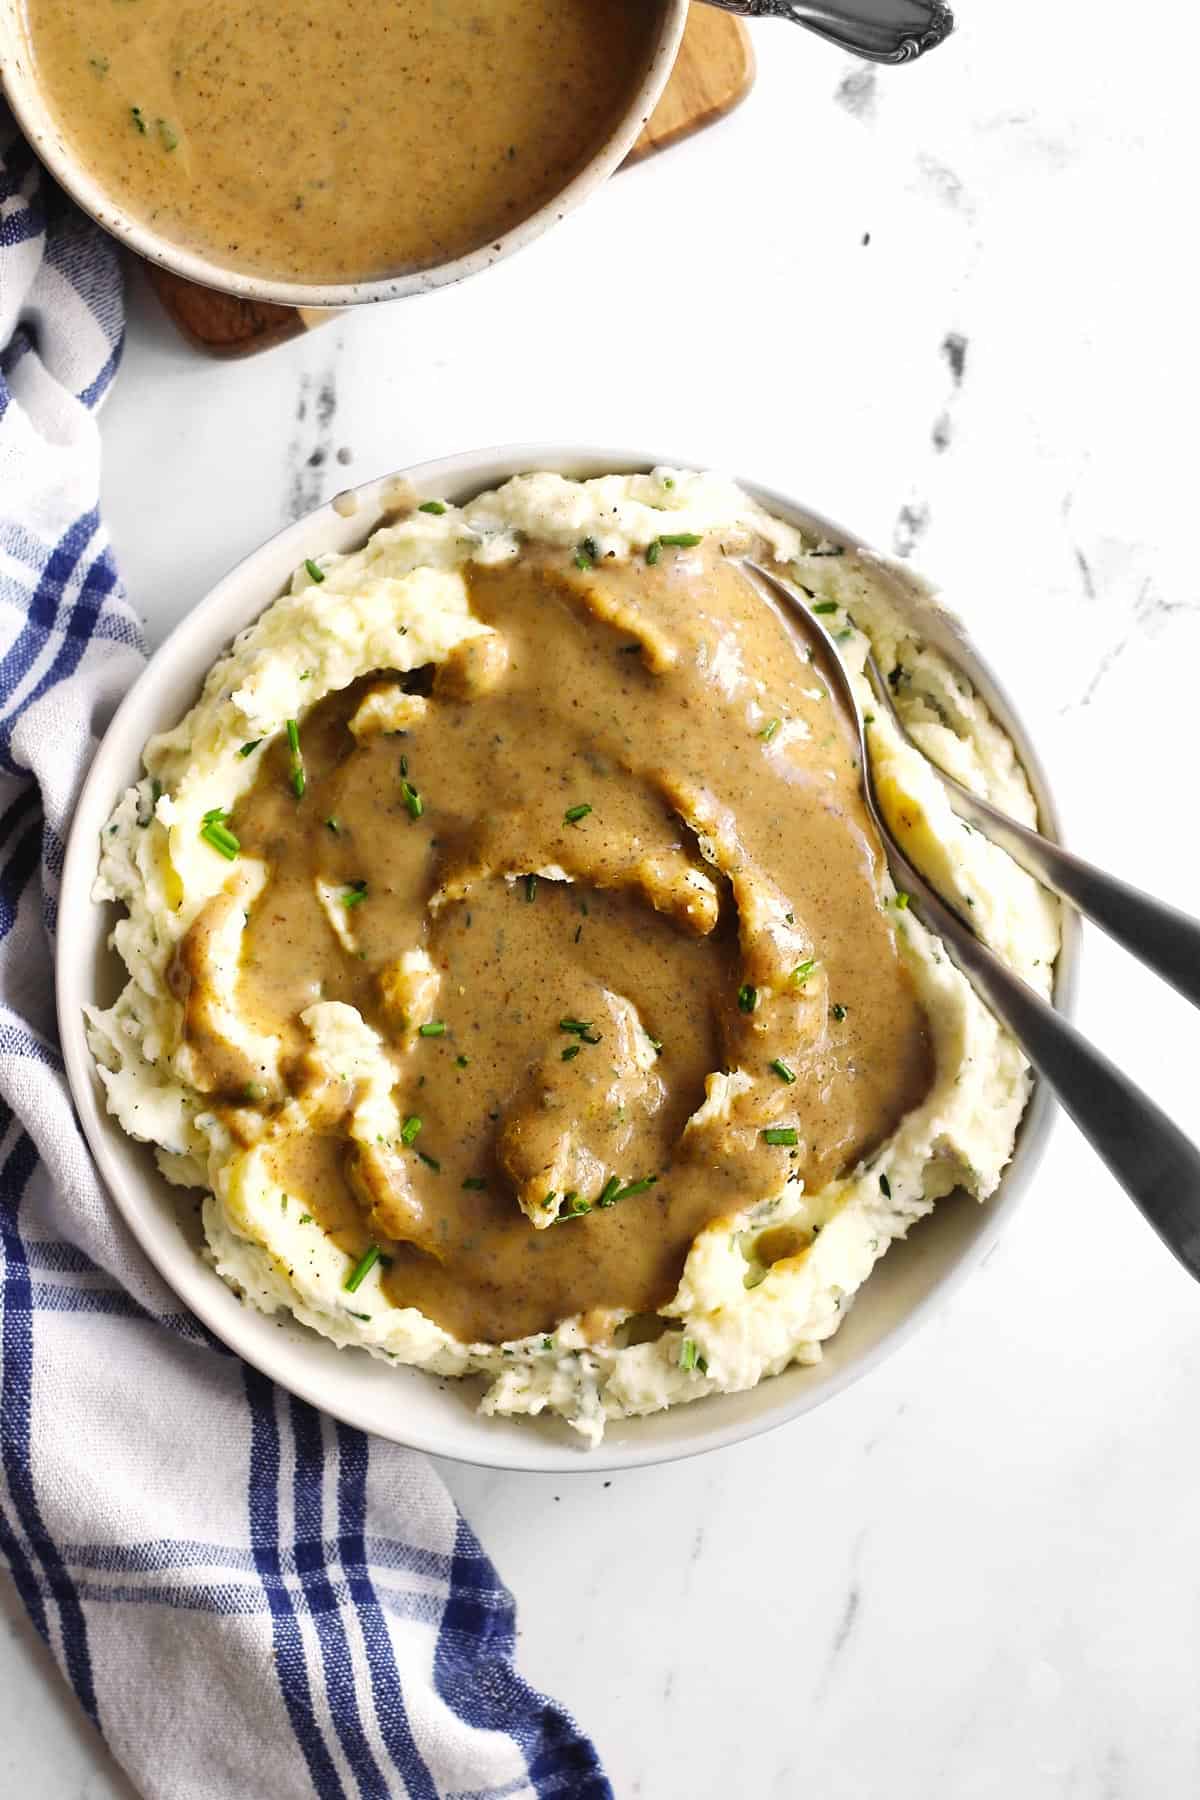 Mashed potatoes and gravy with 2 spoons